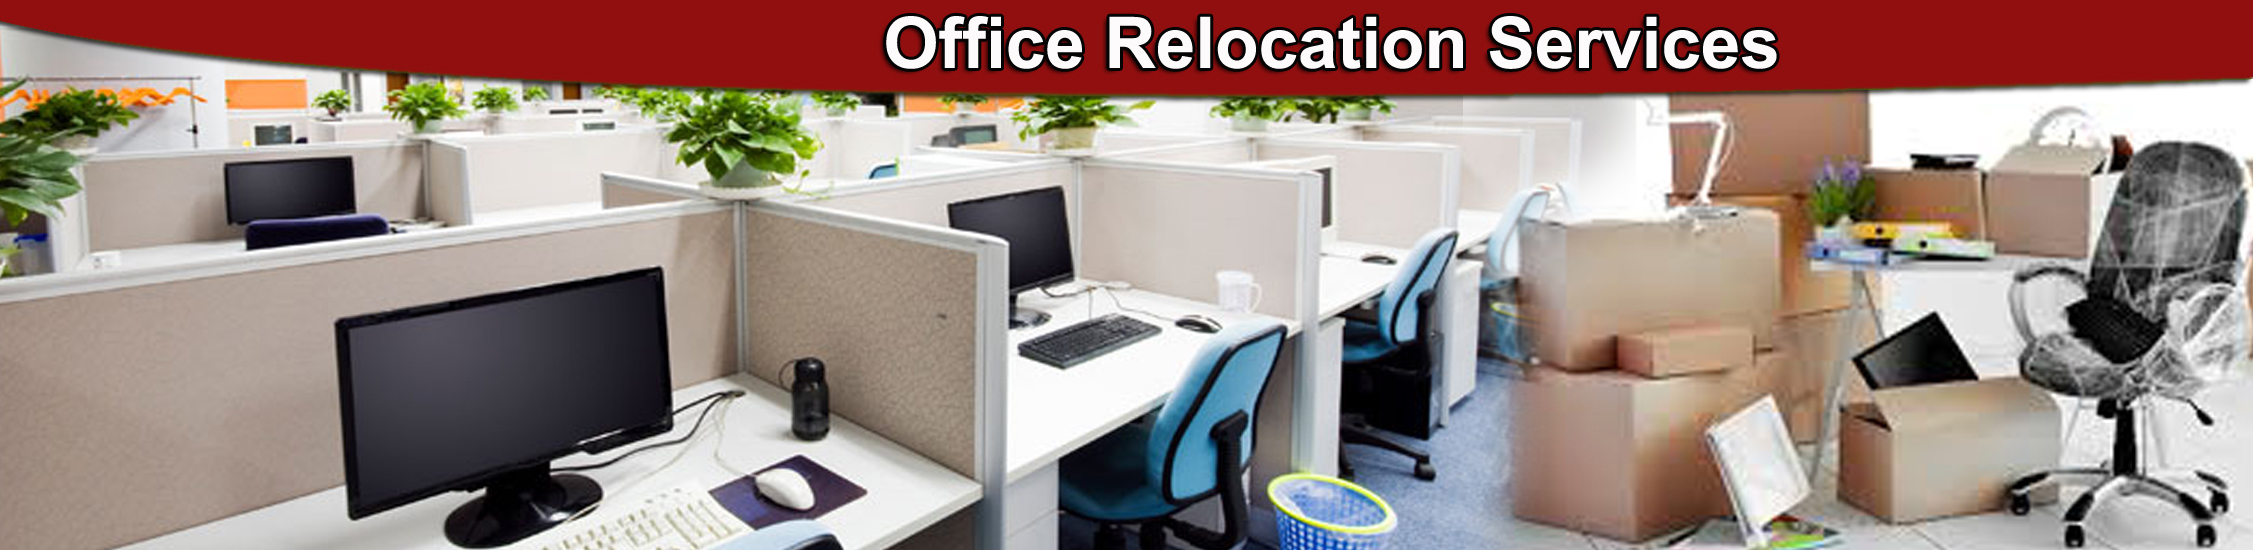 OFFICE RELOCATION